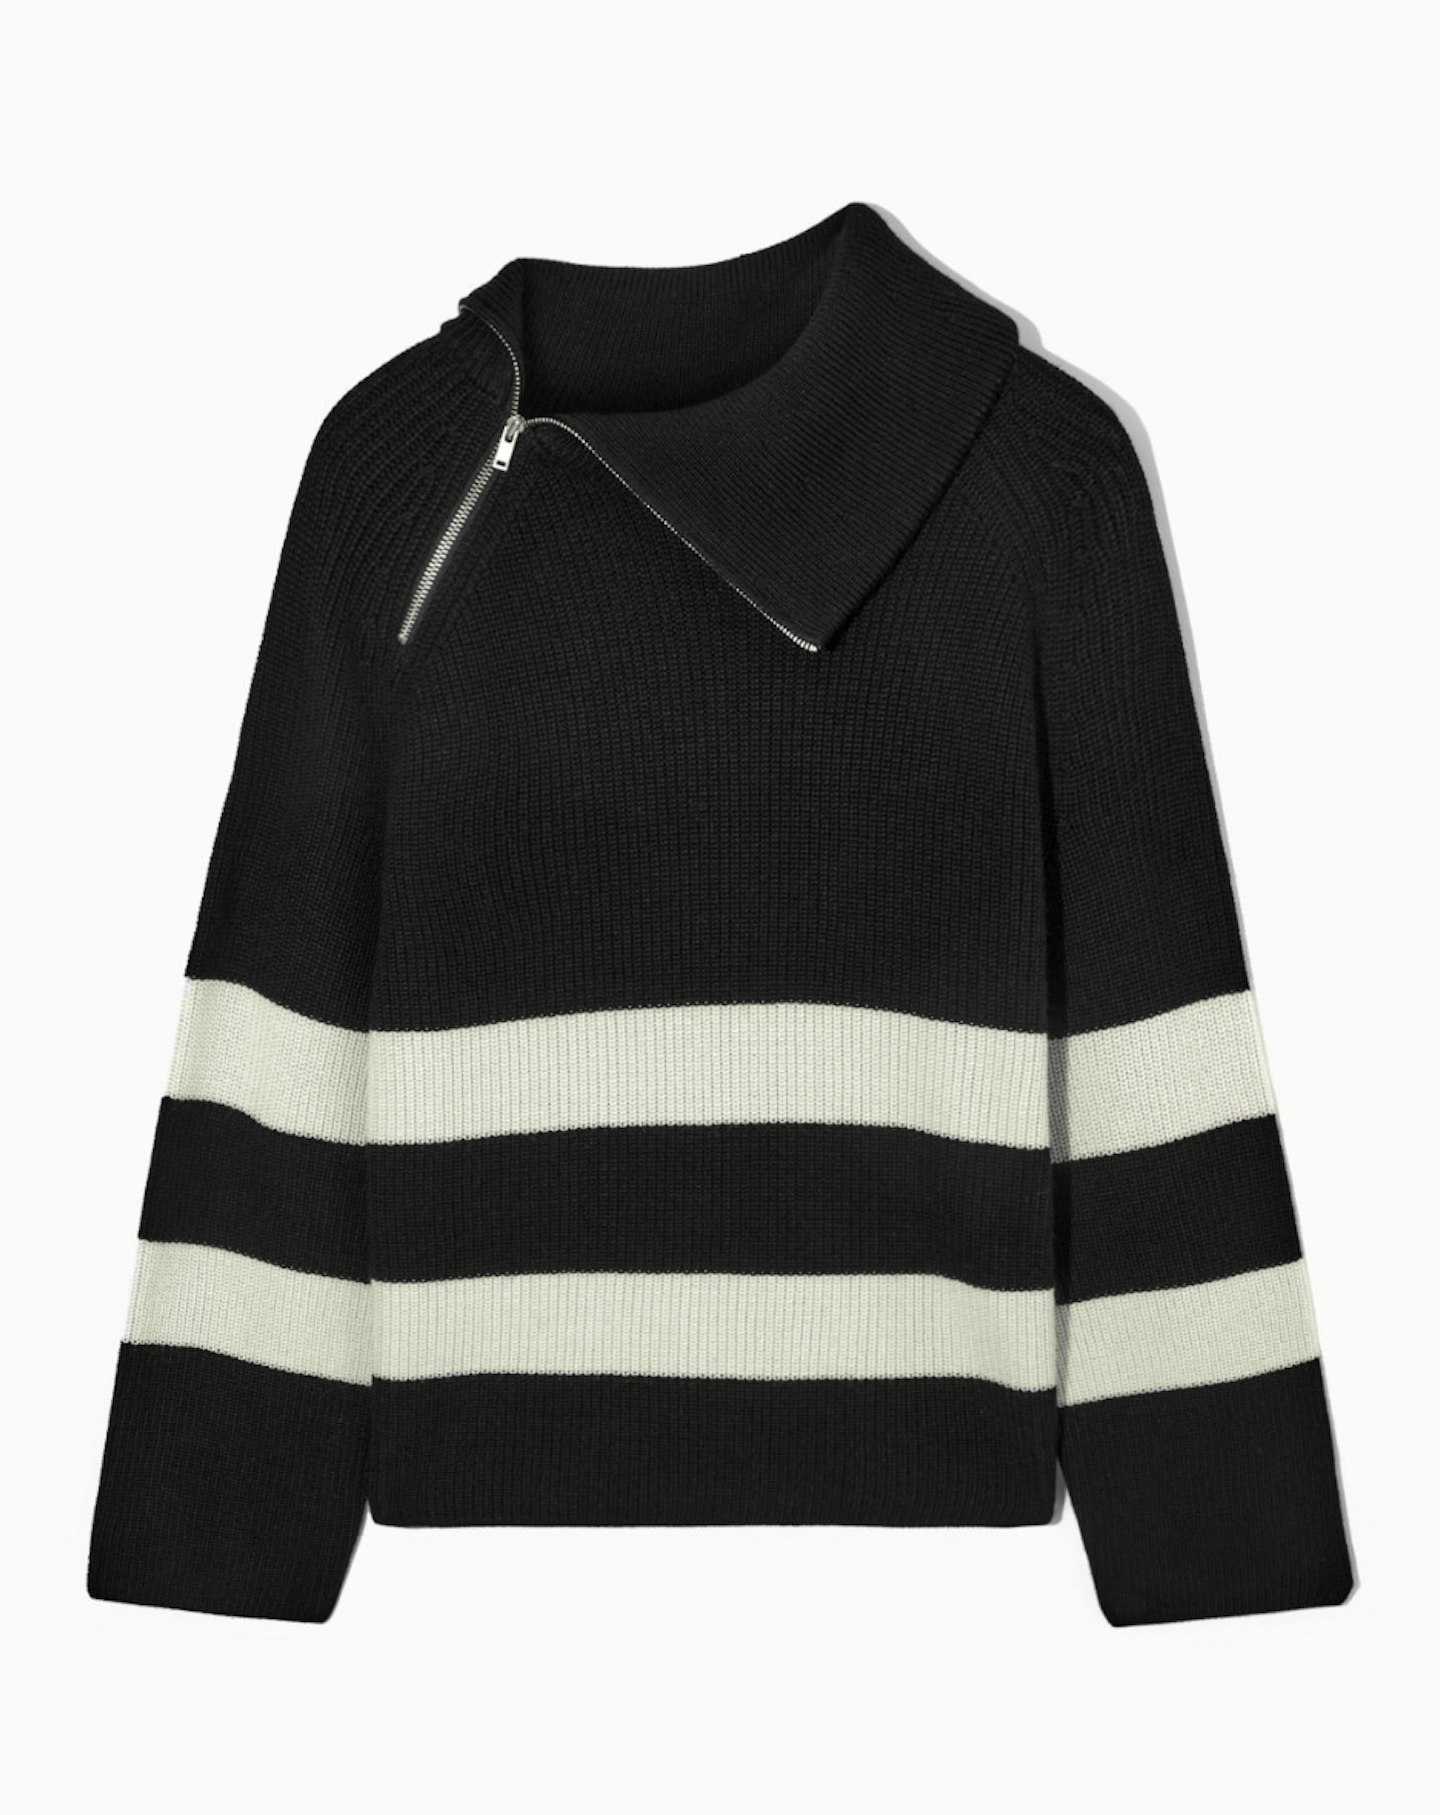 Best Jumpers And Knitwear For Women 2022 | Fashion | Grazia